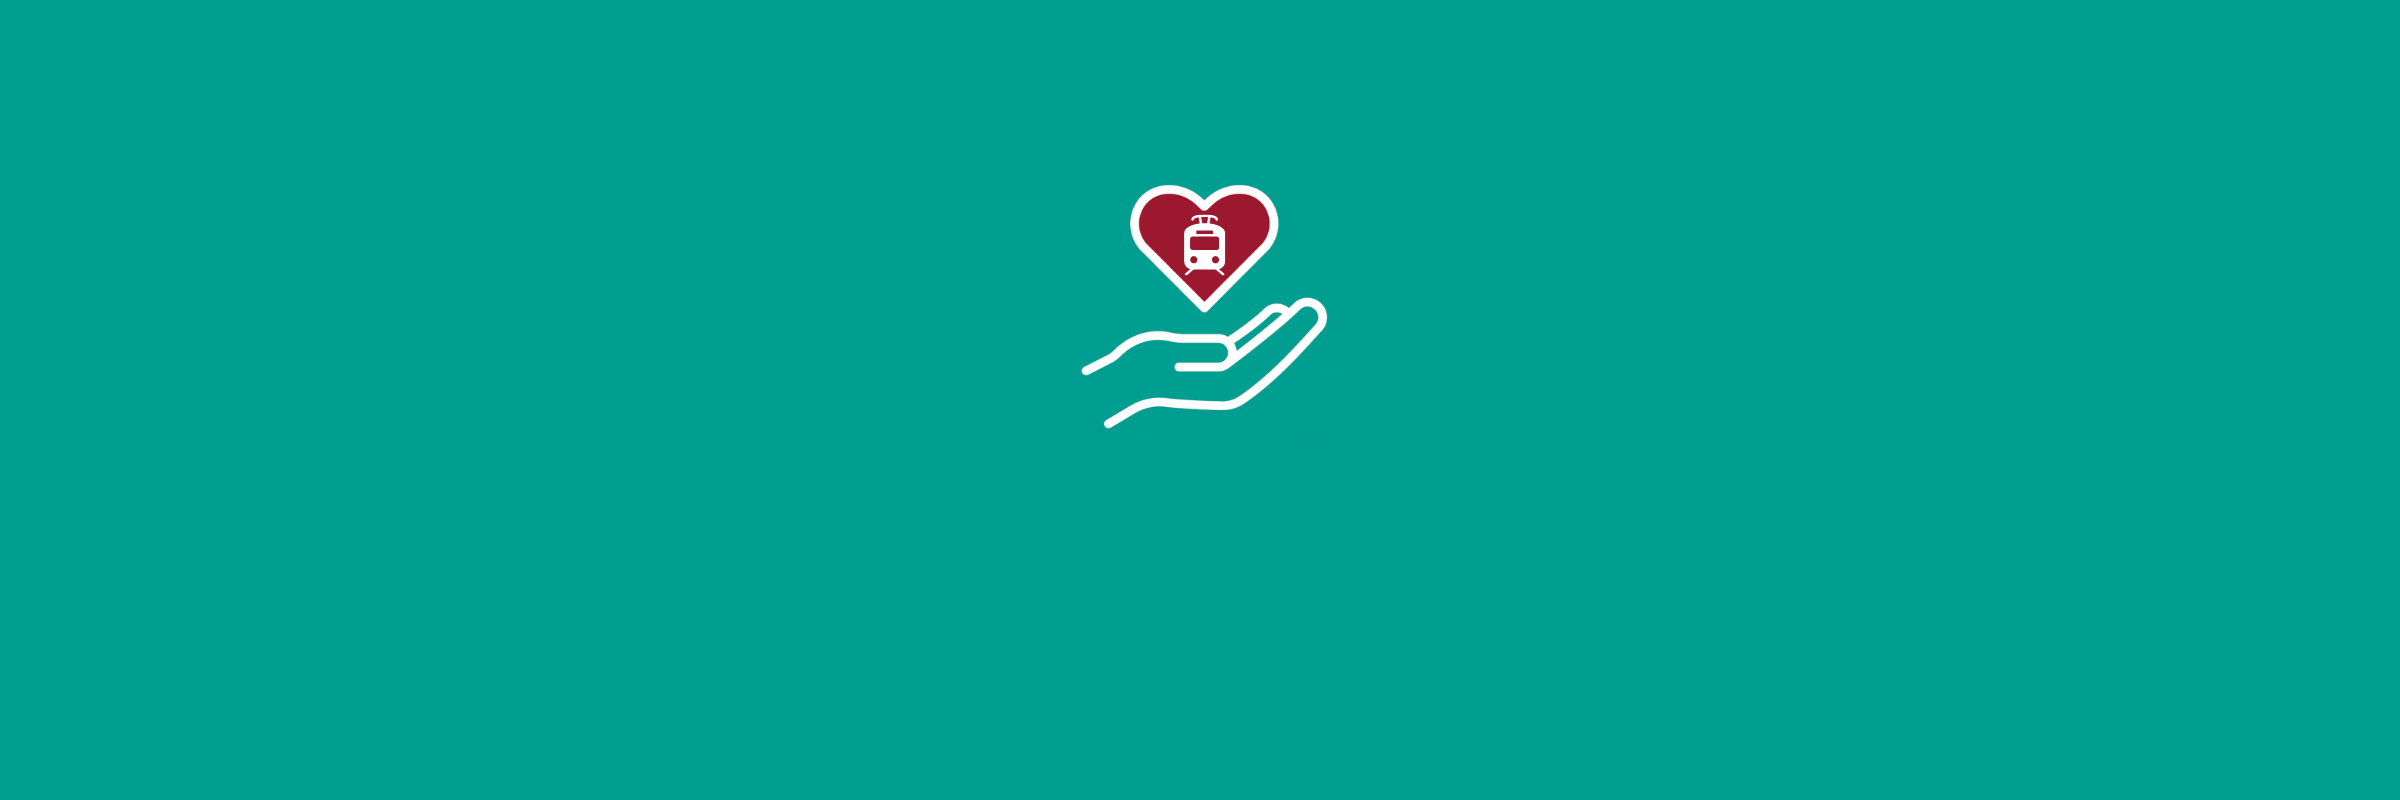 Graphic of a hand holding a heart with a tram inside